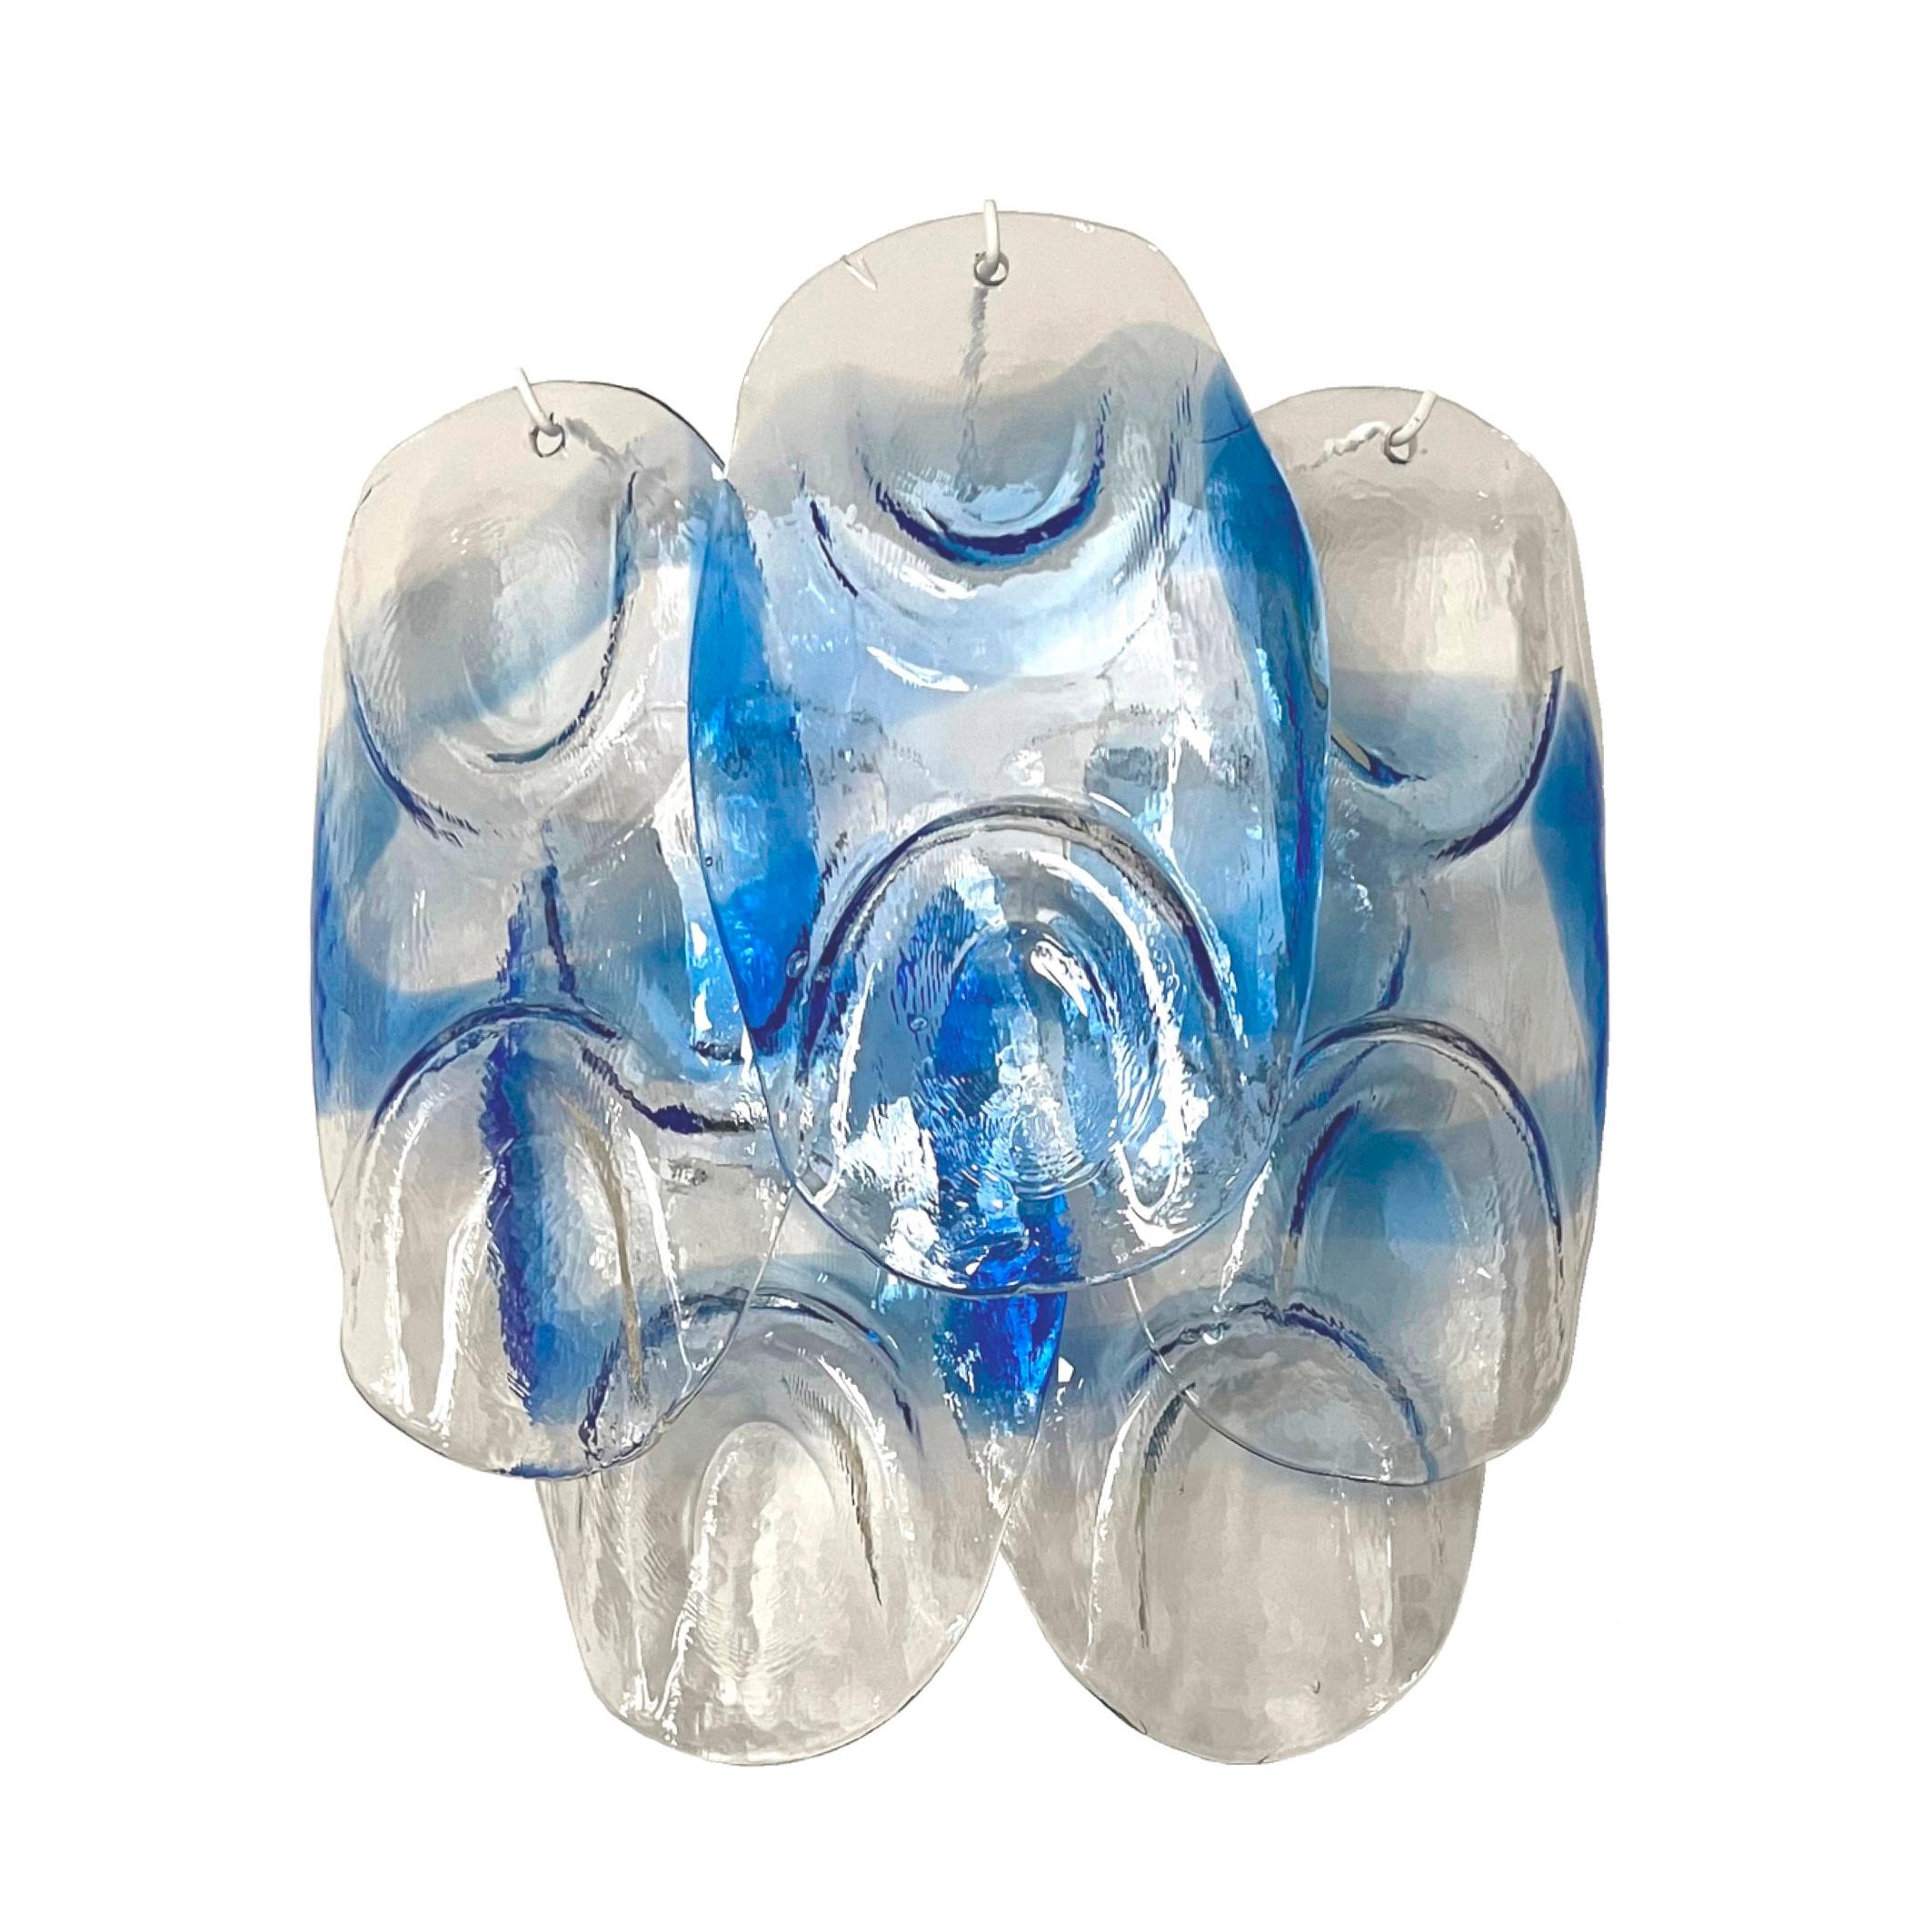 Marvelous, large and unique pair of Italian blue clear Murano glass wall sconces from 1970s.
These sconces were made during the 1970s in Italy for the Venice Company “Mazzega”.
Mazzega lie in the noble Venetian glassworking tradition; the firm was